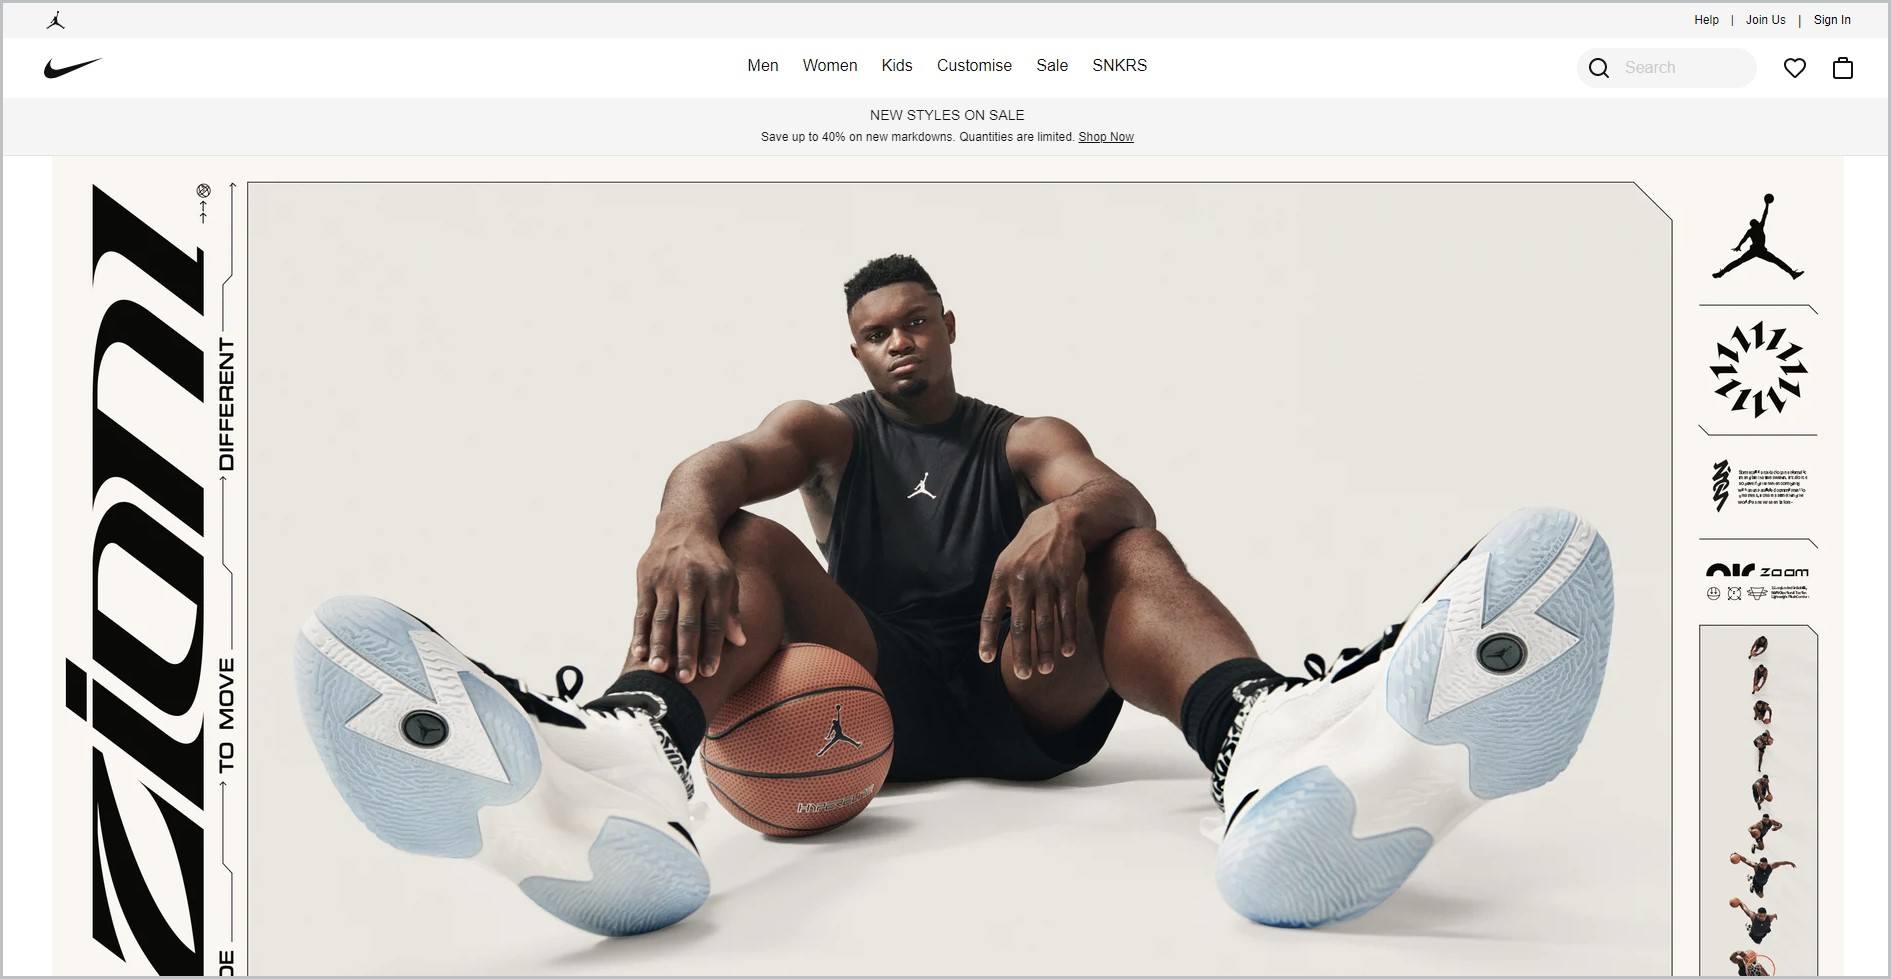 screenshot of Nike homepage with white header with the website's name and main navigation menu, it showcases an image of a black man in jersey top and shorts, wearing sneakers, seated on the floor with a basketball